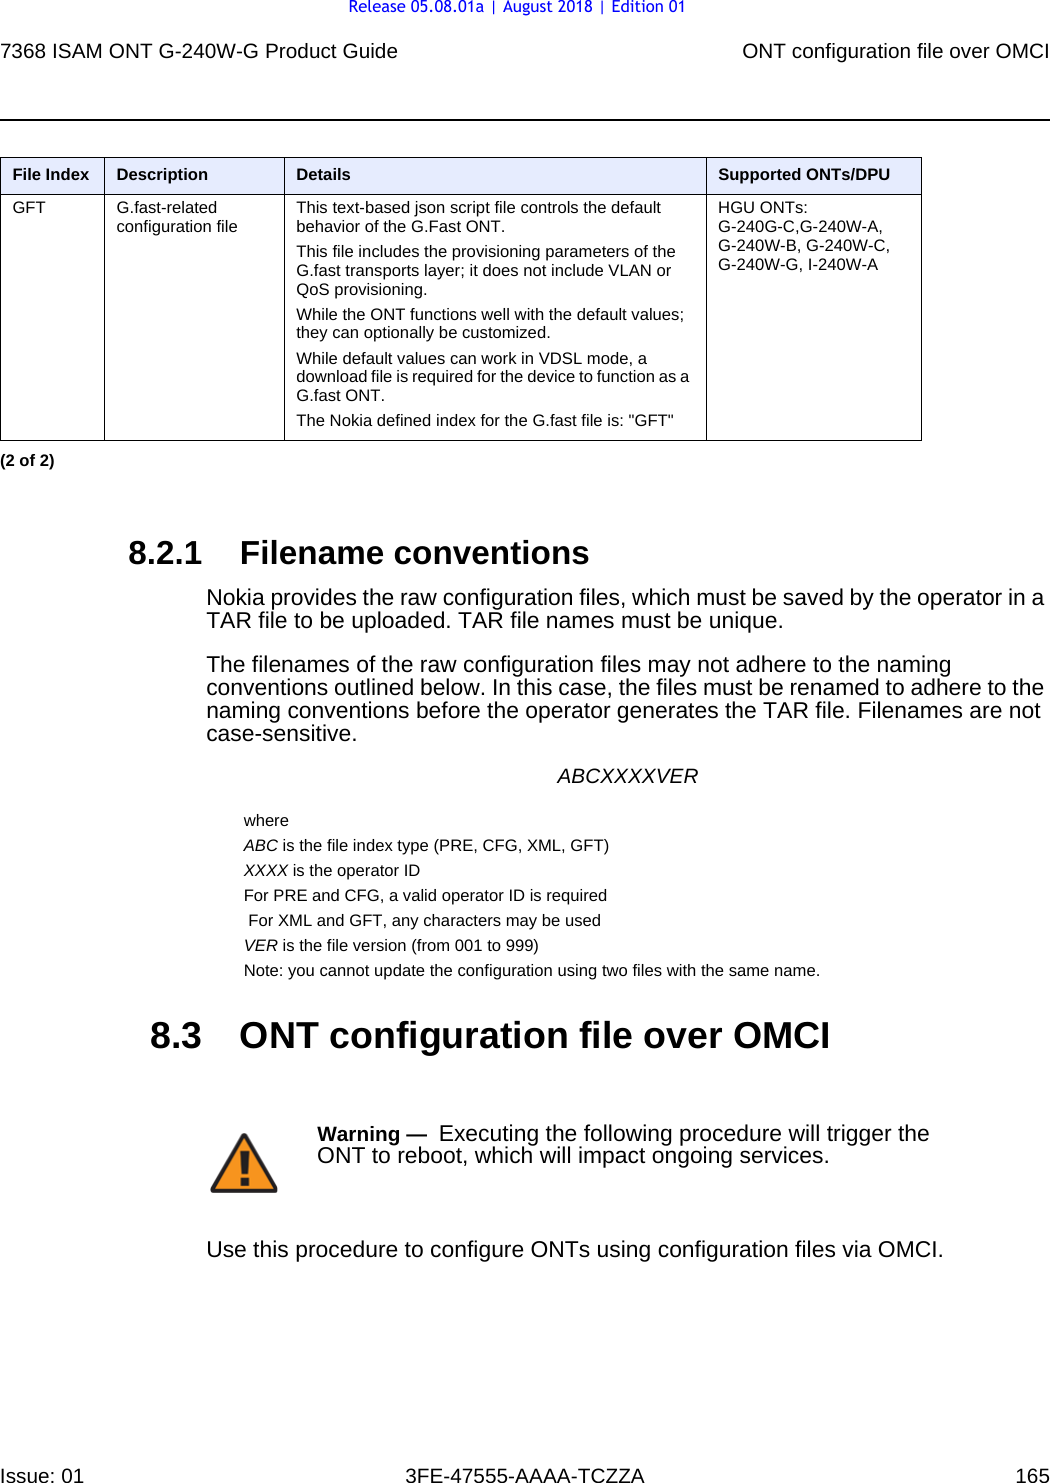 7368 ISAM ONT G-240W-G Product Guide ONT configuration file over OMCIIssue: 01 3FE-47555-AAAA-TCZZA 165 8.2.1 Filename conventionsNokia provides the raw configuration files, which must be saved by the operator in a TAR file to be uploaded. TAR file names must be unique.The filenames of the raw configuration files may not adhere to the naming conventions outlined below. In this case, the files must be renamed to adhere to the naming conventions before the operator generates the TAR file. Filenames are not case-sensitive.ABCXXXXVERwhereABC is the file index type (PRE, CFG, XML, GFT)XXXX is the operator IDFor PRE and CFG, a valid operator ID is required For XML and GFT, any characters may be usedVER is the file version (from 001 to 999) Note: you cannot update the configuration using two files with the same name.8.3 ONT configuration file over OMCIUse this procedure to configure ONTs using configuration files via OMCI.GFT G.fast-related configuration file This text-based json script file controls the default behavior of the G.Fast ONT. This file includes the provisioning parameters of the G.fast transports layer; it does not include VLAN or QoS provisioning. While the ONT functions well with the default values; they can optionally be customized. While default values can work in VDSL mode, a download file is required for the device to function as a G.fast ONT.The Nokia defined index for the G.fast file is: &quot;GFT&quot;HGU ONTs:G-240G-C,G-240W-A, G-240W-B, G-240W-C, G-240W-G, I-240W-AFile Index Description Details Supported ONTs/DPU(2 of 2)Warning —  Executing the following procedure will trigger the ONT to reboot, which will impact ongoing services.Release 05.08.01a | August 2018 | Edition 01